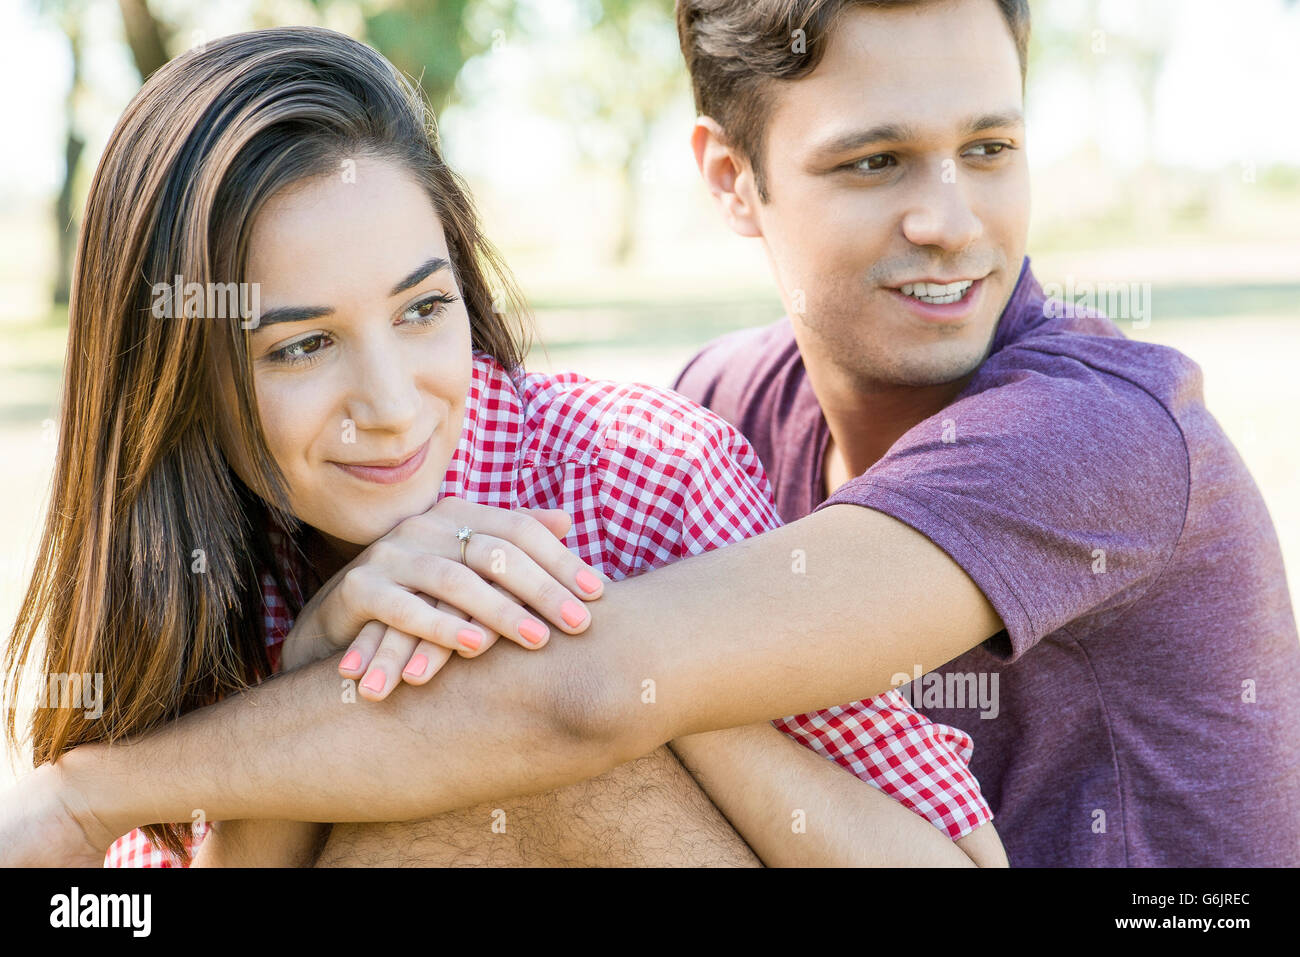 Couple envisioning future together Stock Photo